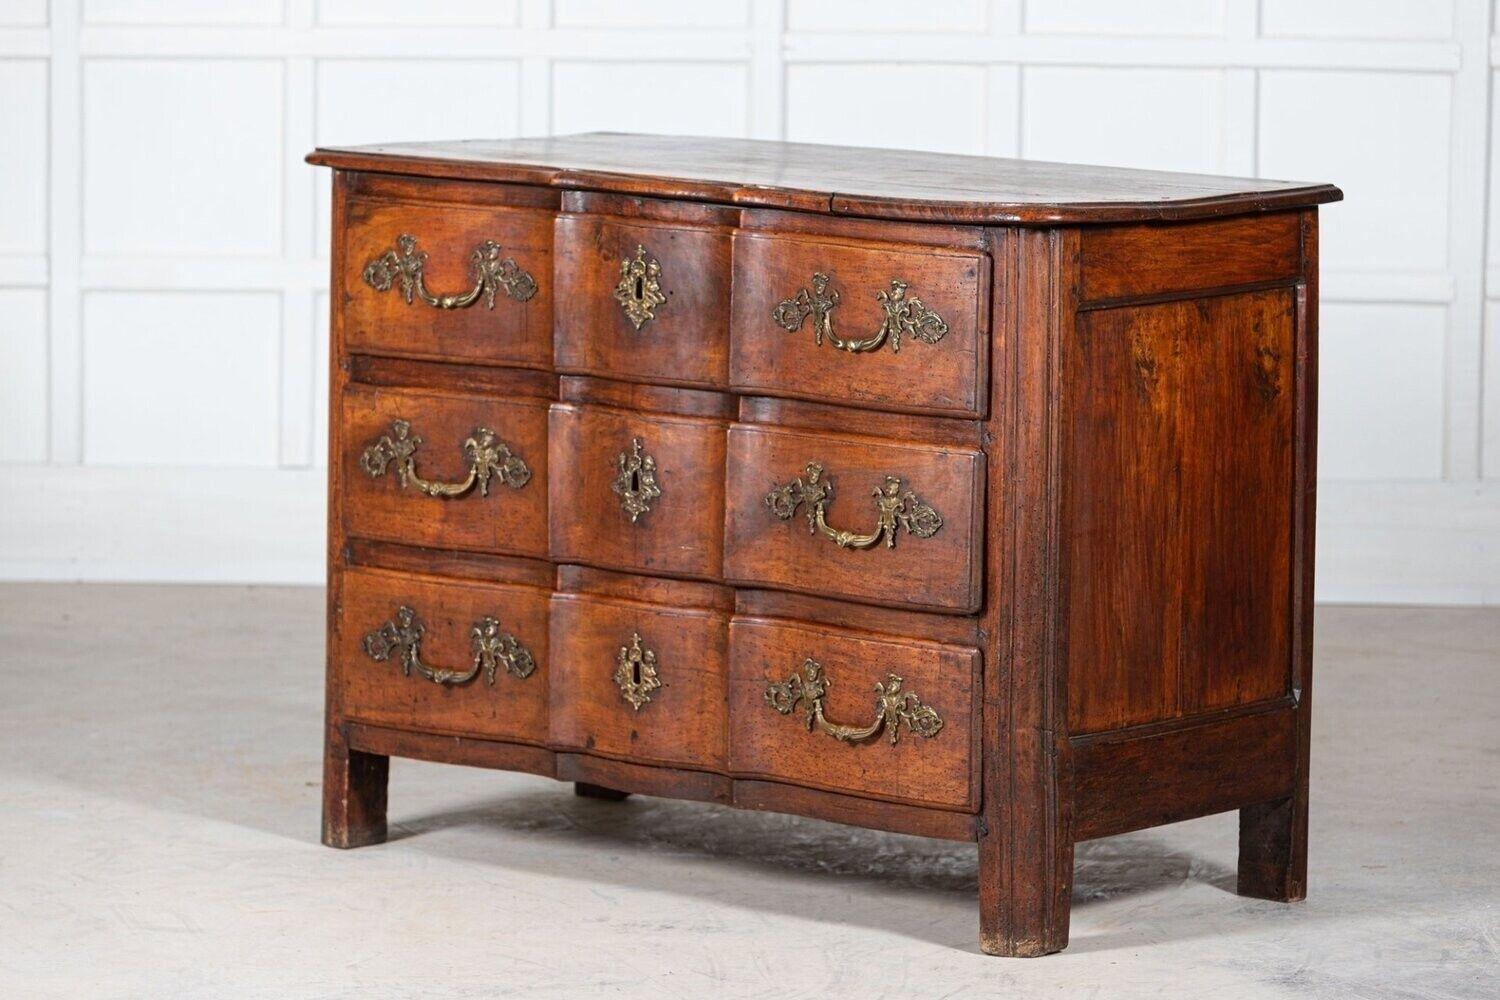 circa 1750
18thC French walnut bombe chest Commode
Measures: W 133 x D 64 x H 95cm.
     